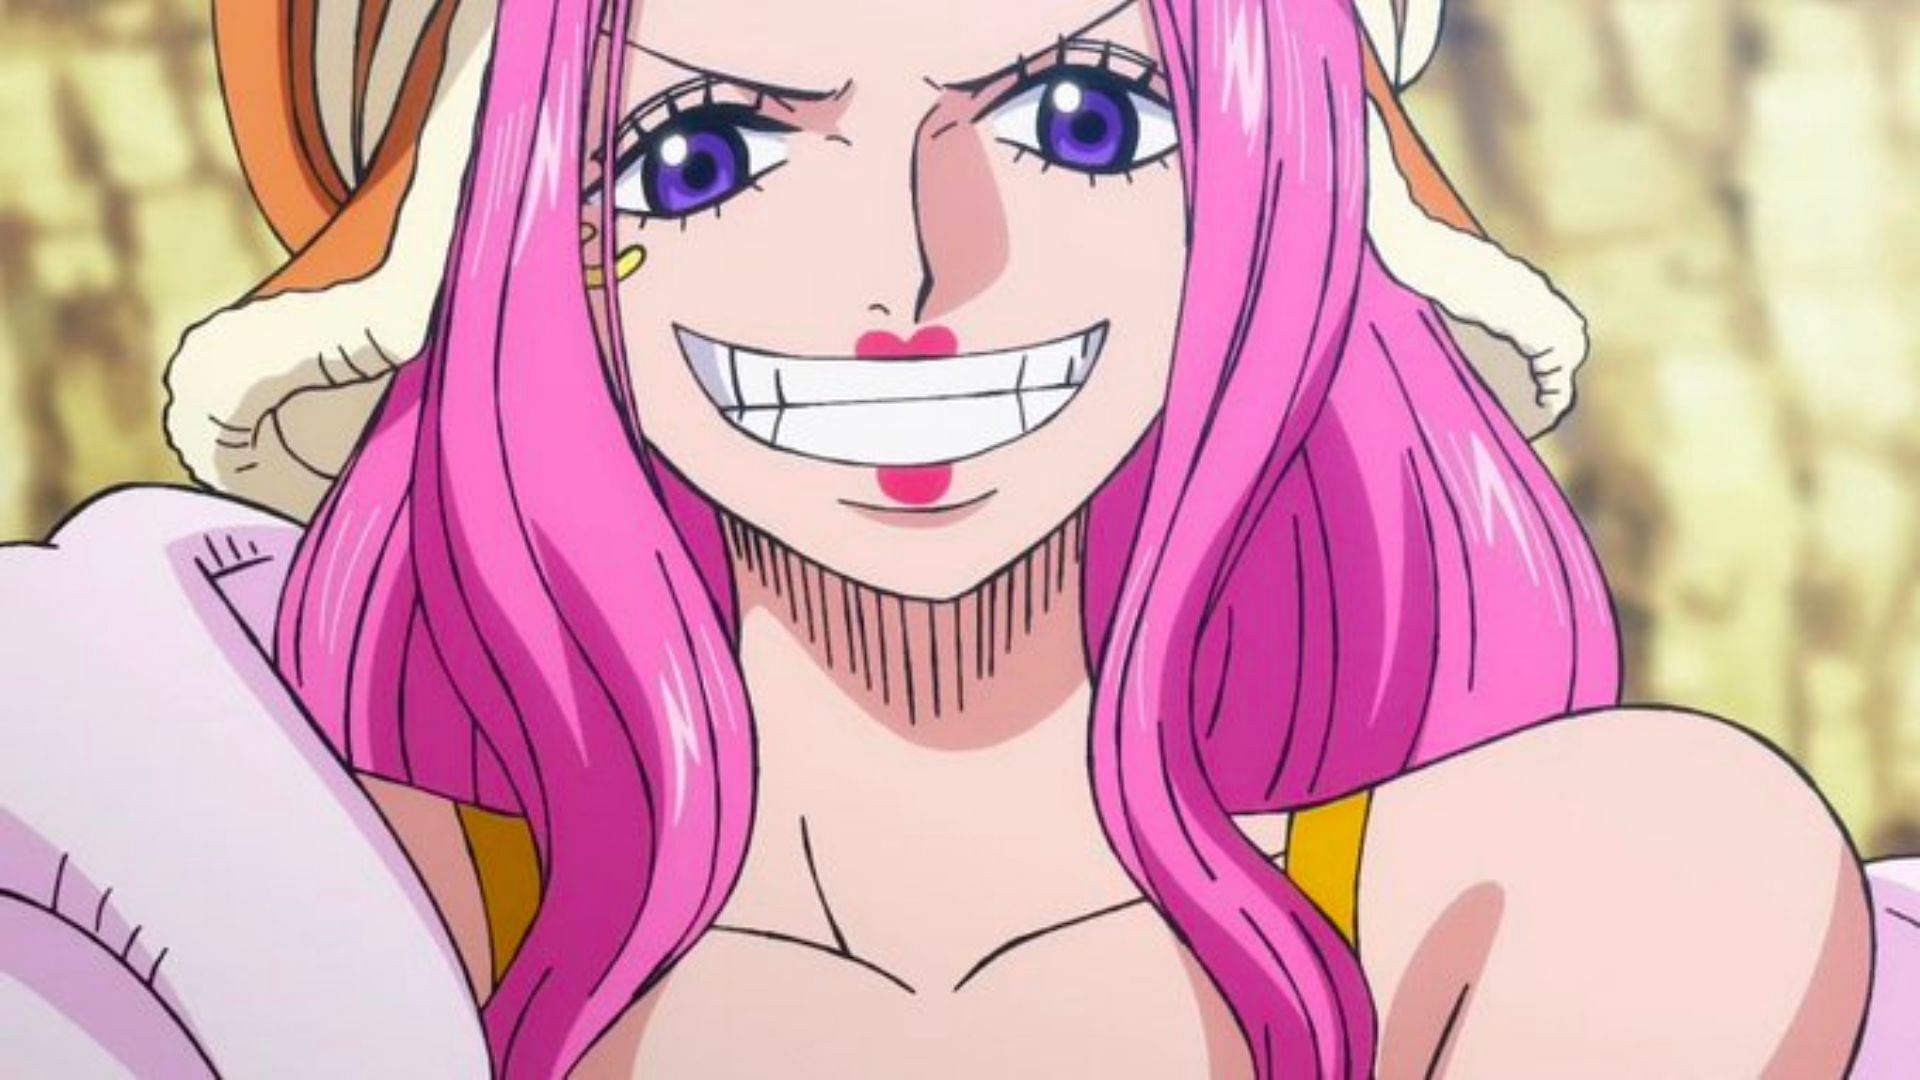 Bonney as seen in the anime series (Image via Toei Animation)